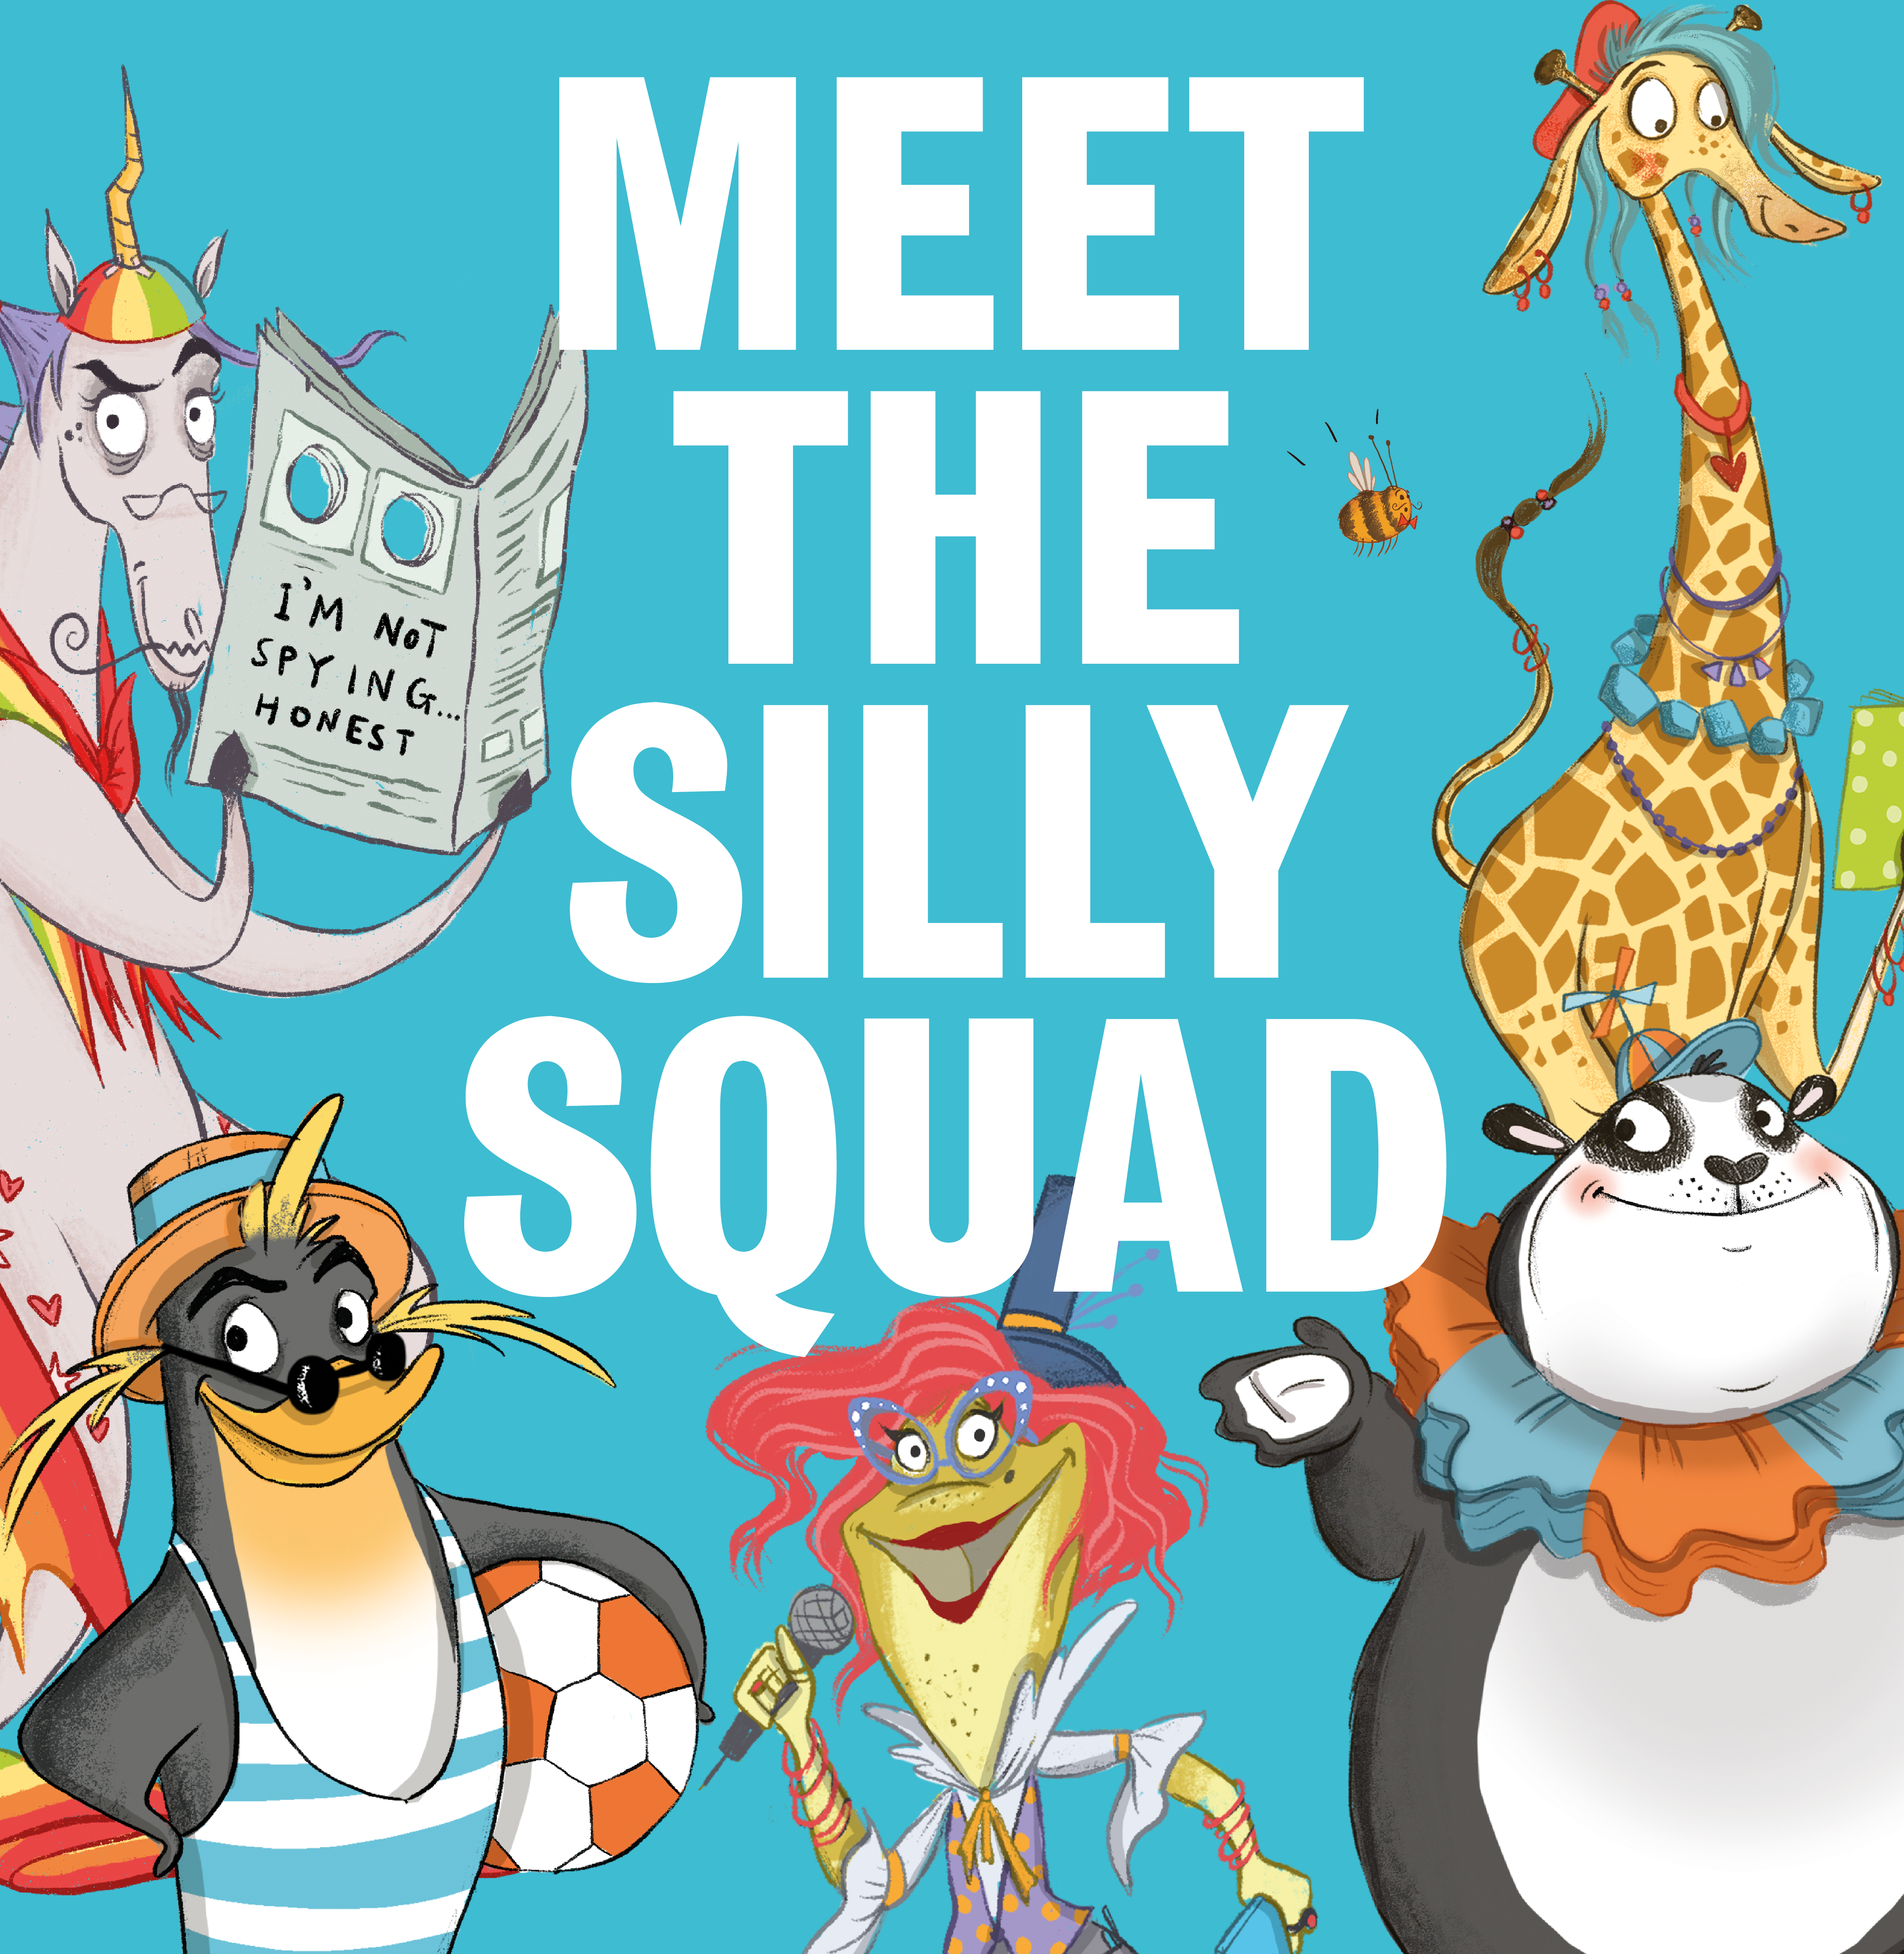 Text in white saying meet the silly squad and surrounded by silly squad characted incuding a giraffe, penguin, frog and bear